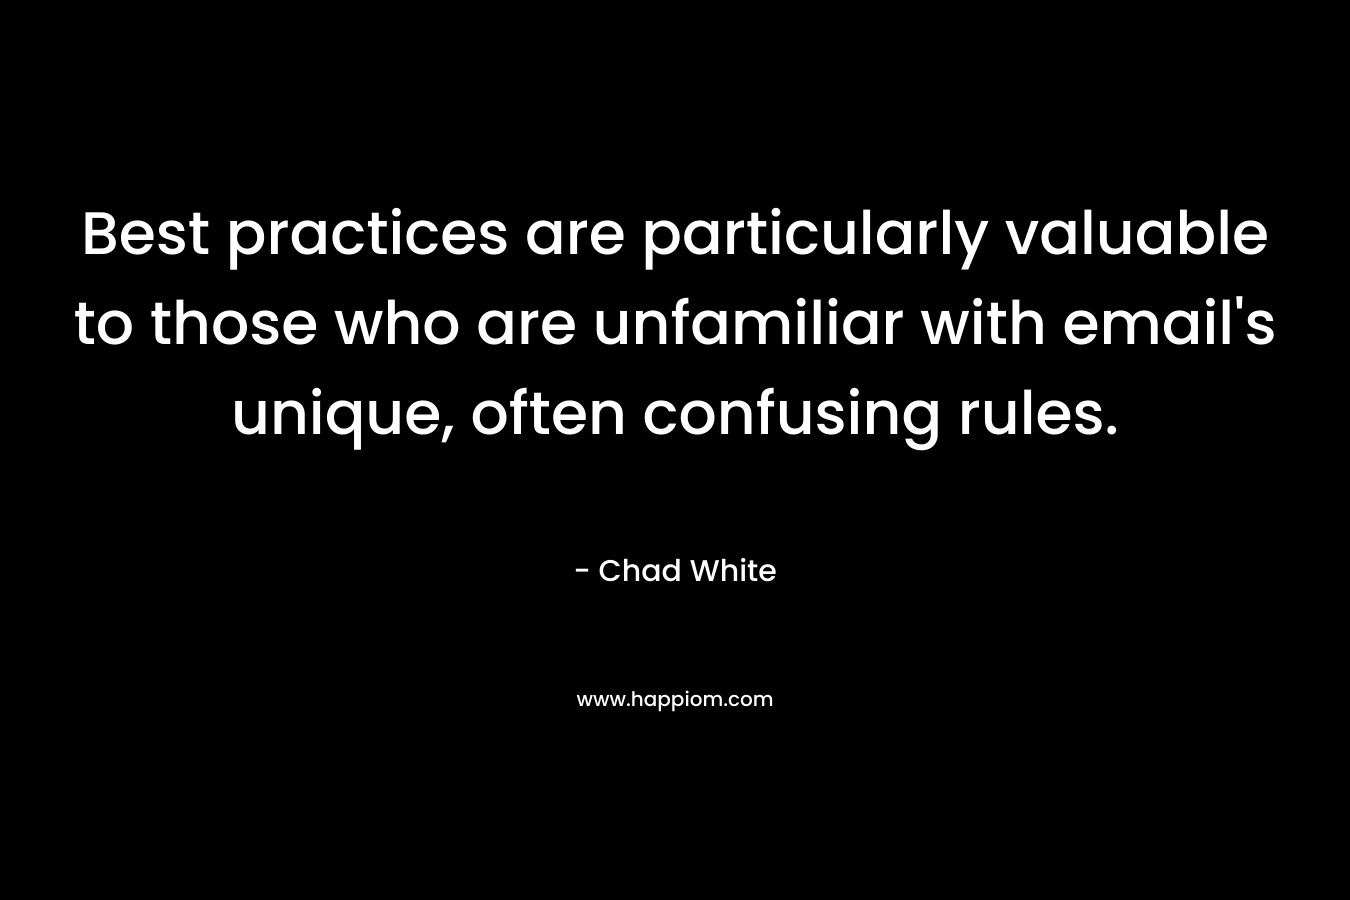 Best practices are particularly valuable to those who are unfamiliar with email’s unique, often confusing rules. – Chad White